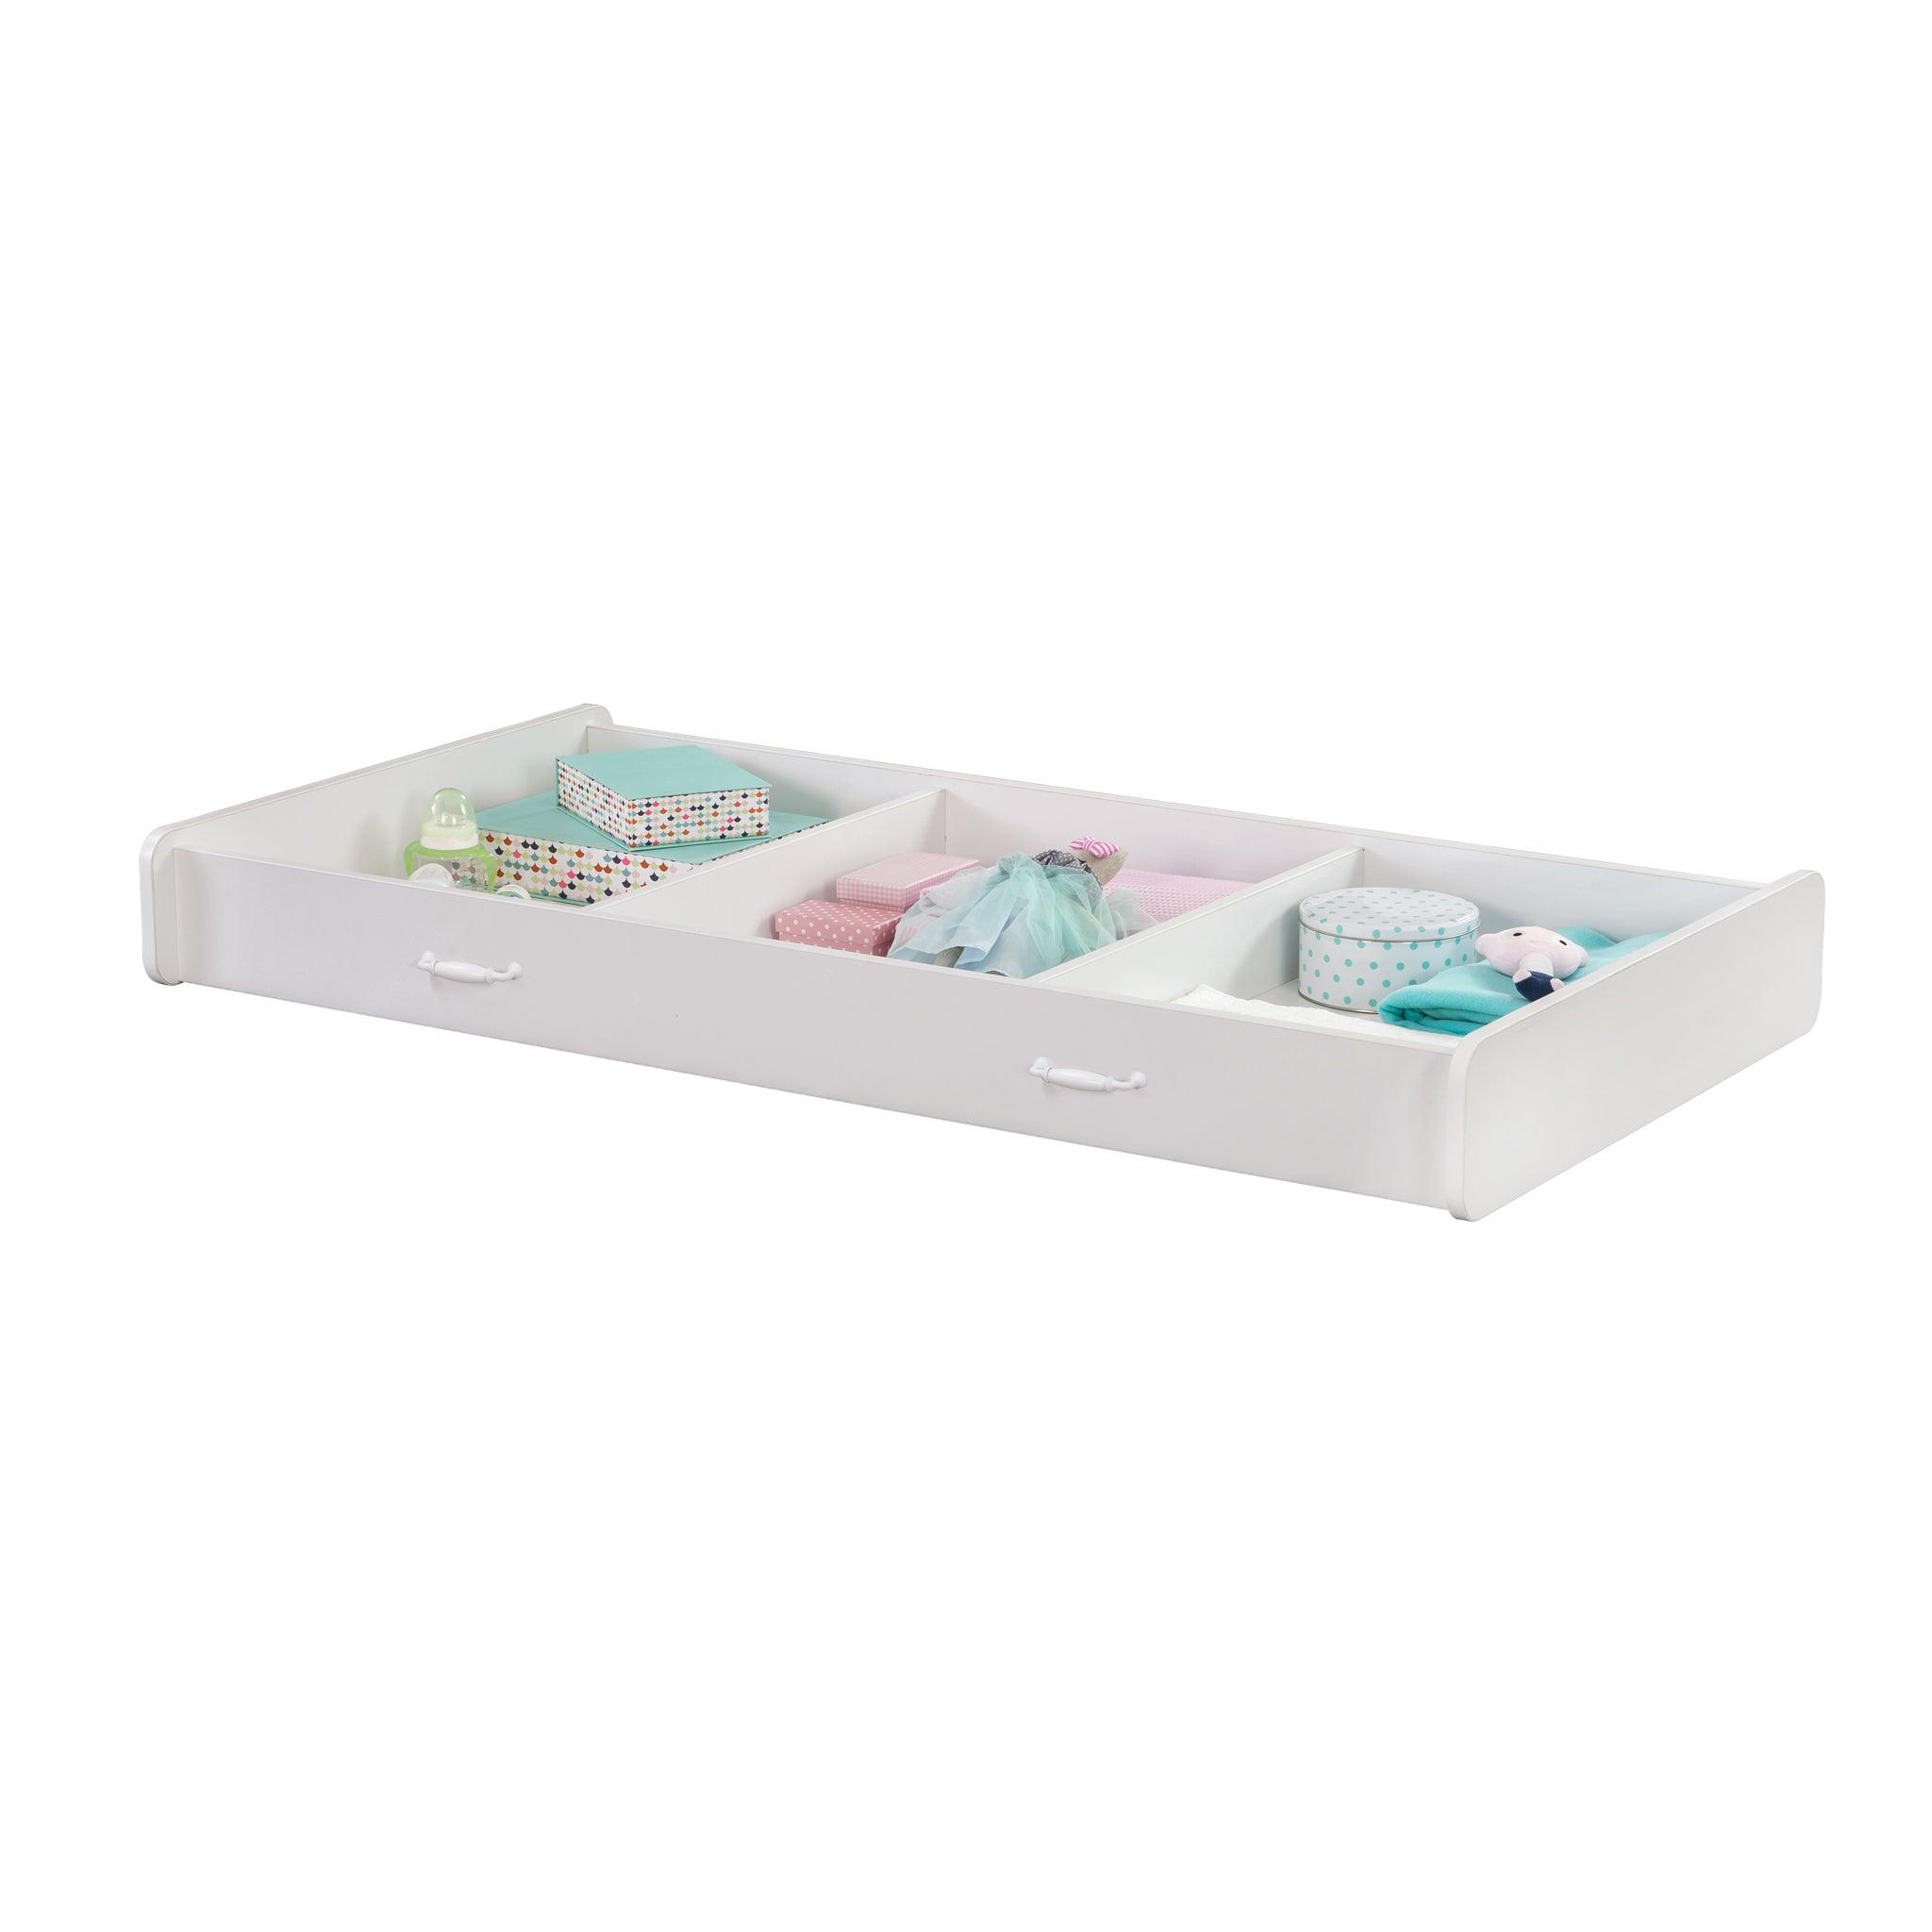 Cilek Selena Baby Bed Pull-out Drawer (Fits 70X140 cm cot) - Kids Haven